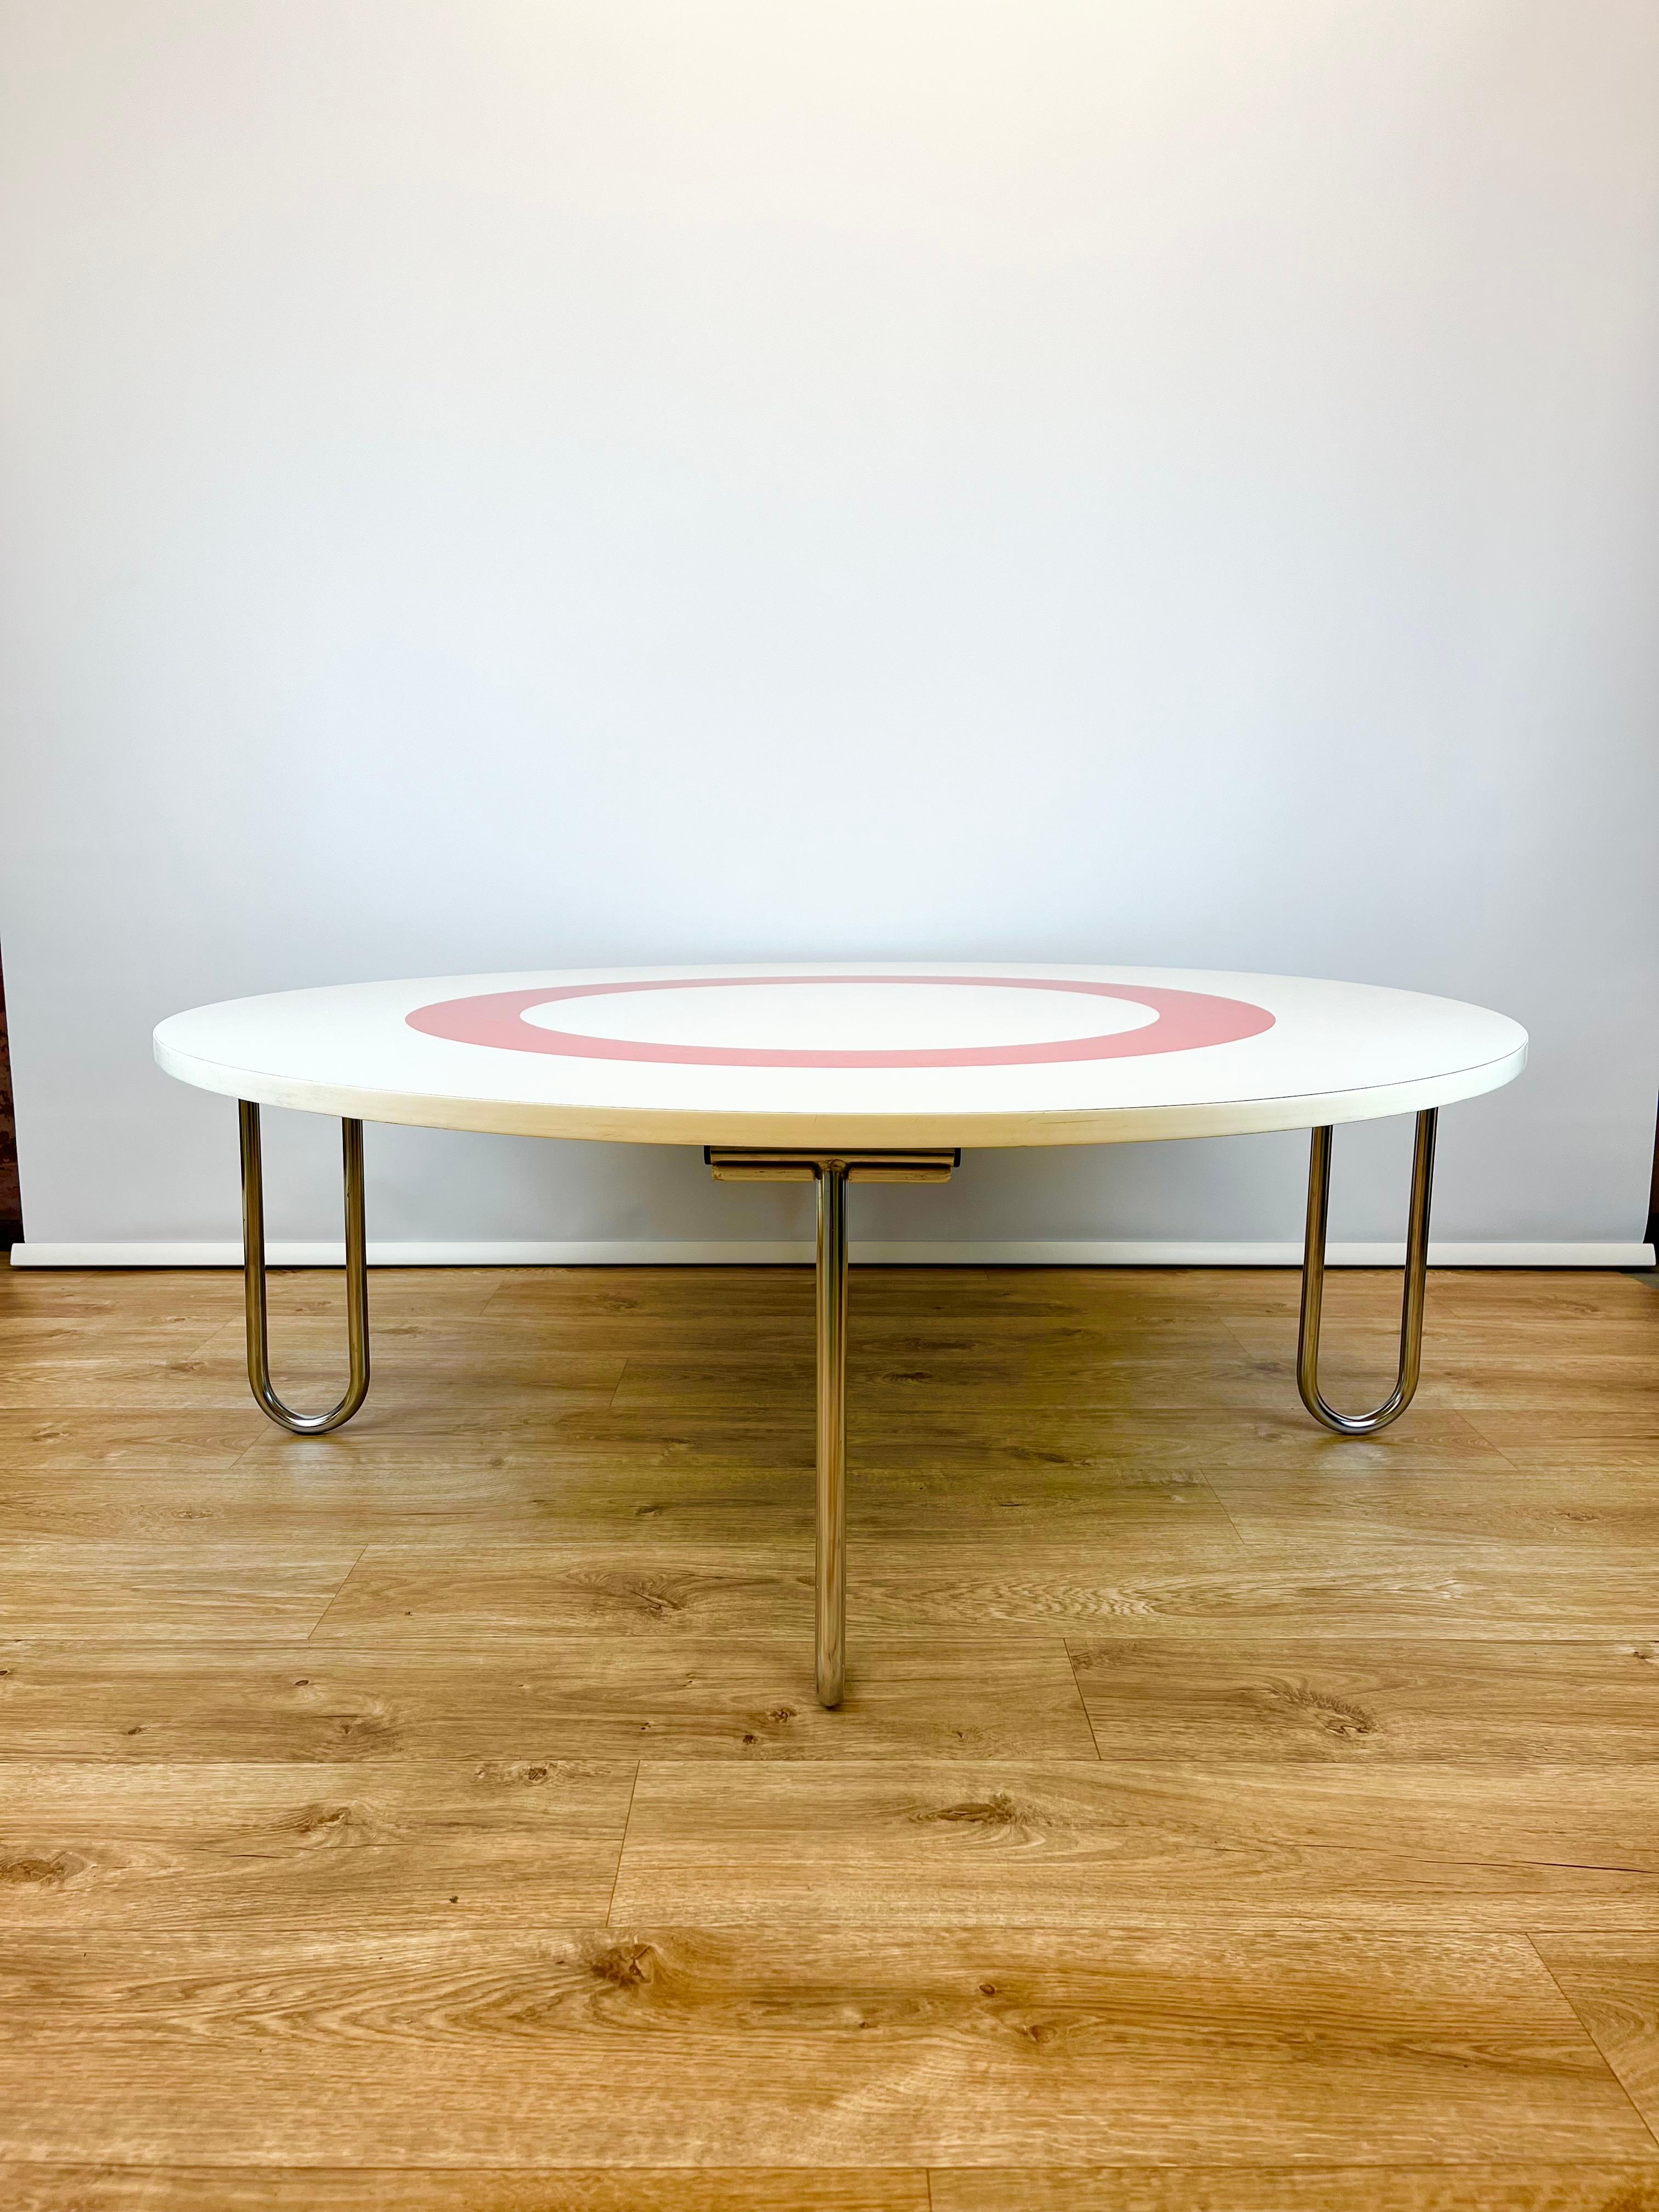 Modernist Mid Century Coffee Table Ruud Ekstrand & Christer Norman, Dux Sweden In Good Condition For Sale In London, GB